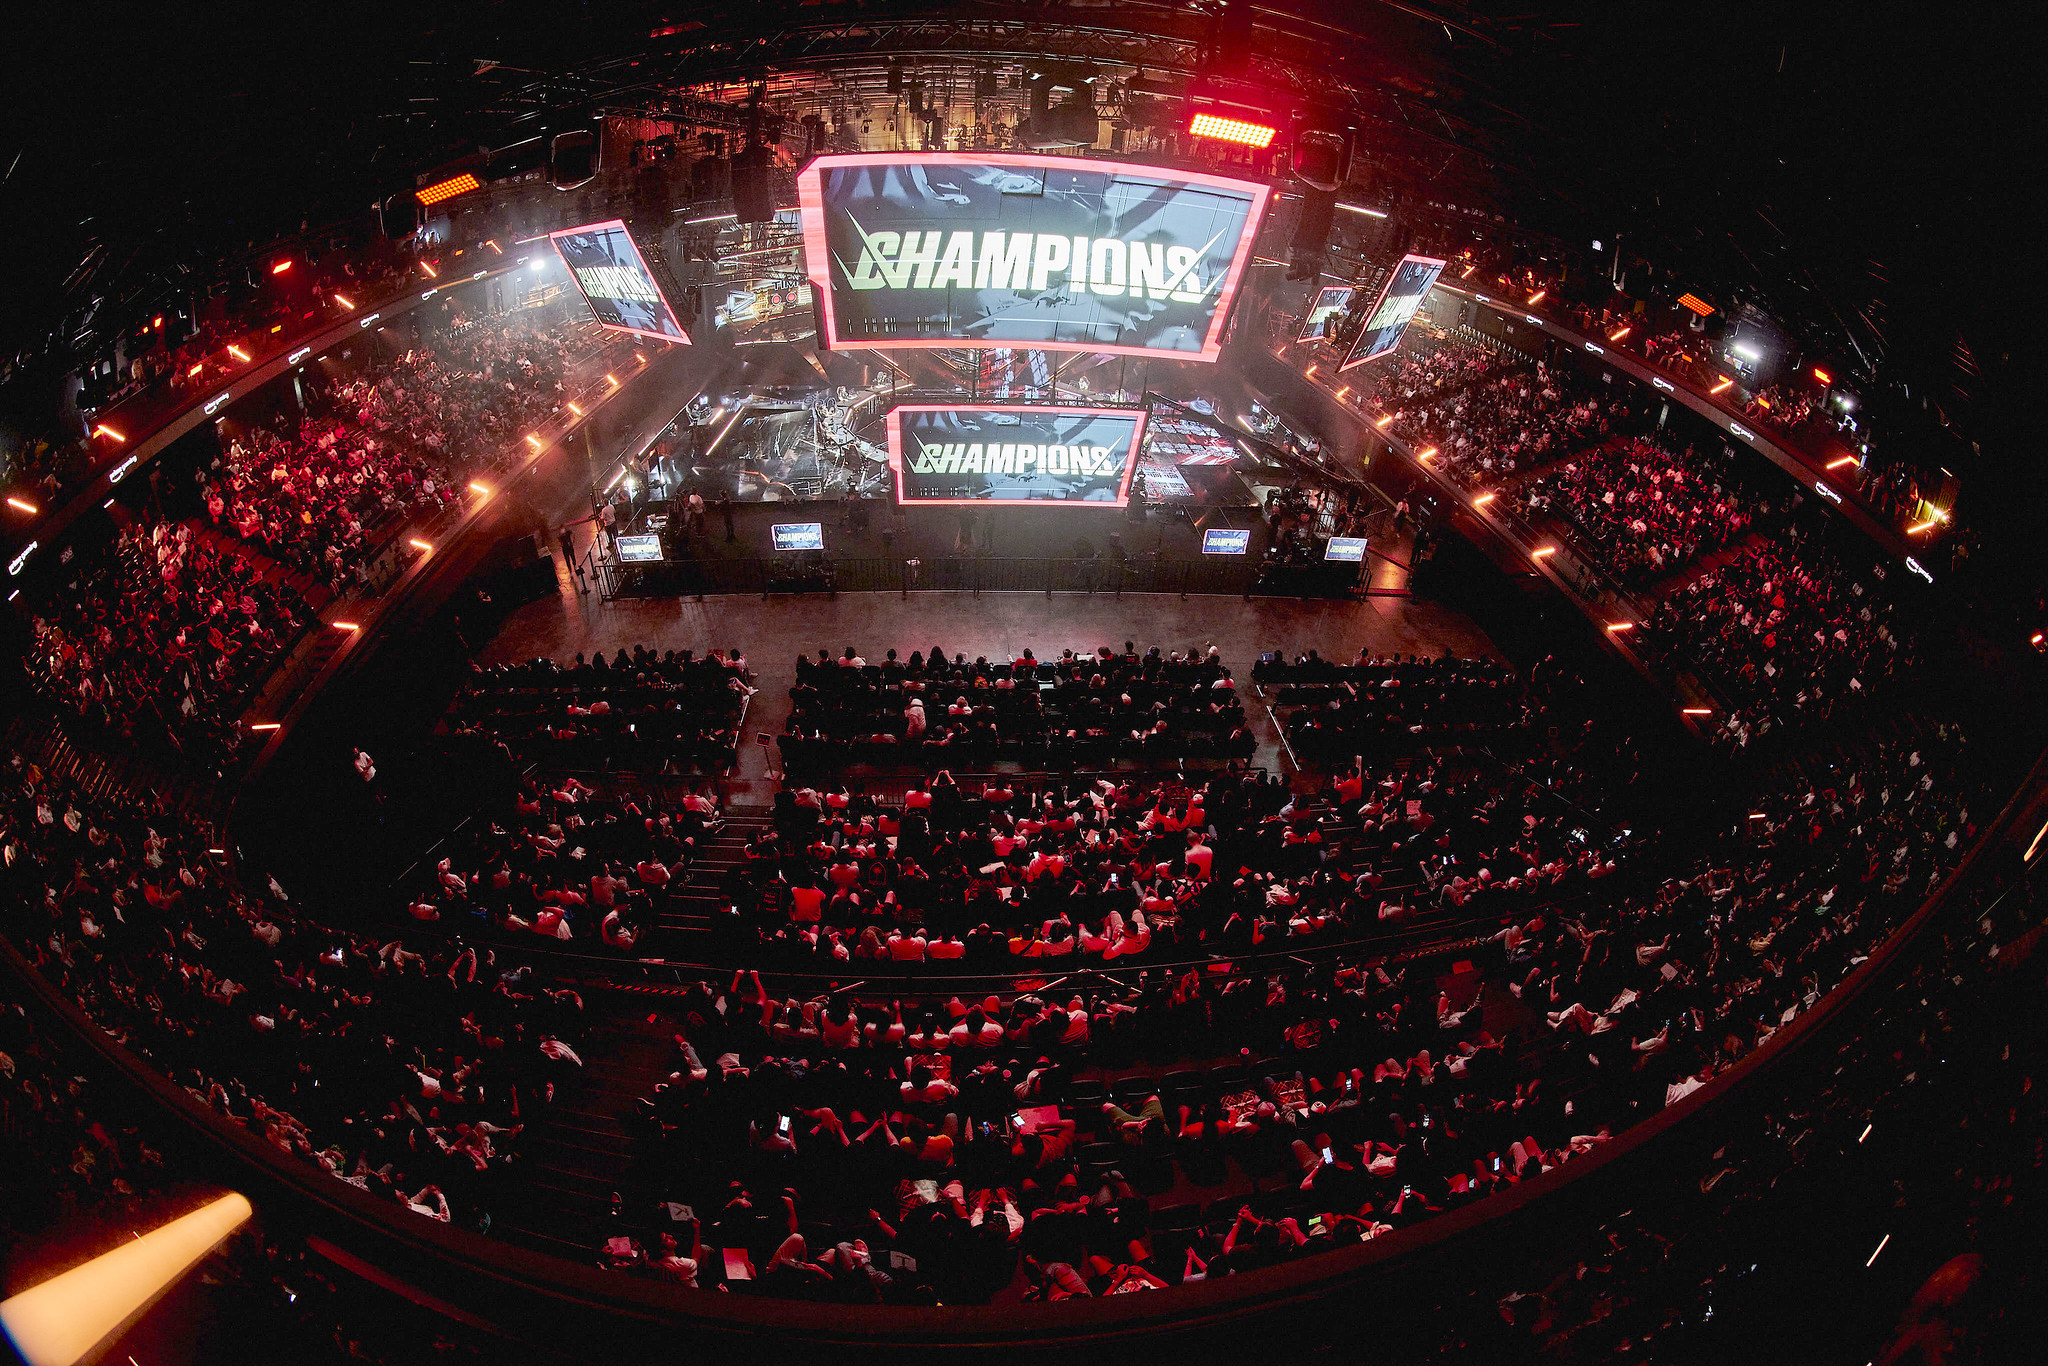 VCT Champions 2023 to feature largest prize pool in VALORANT history - Dot  Esports